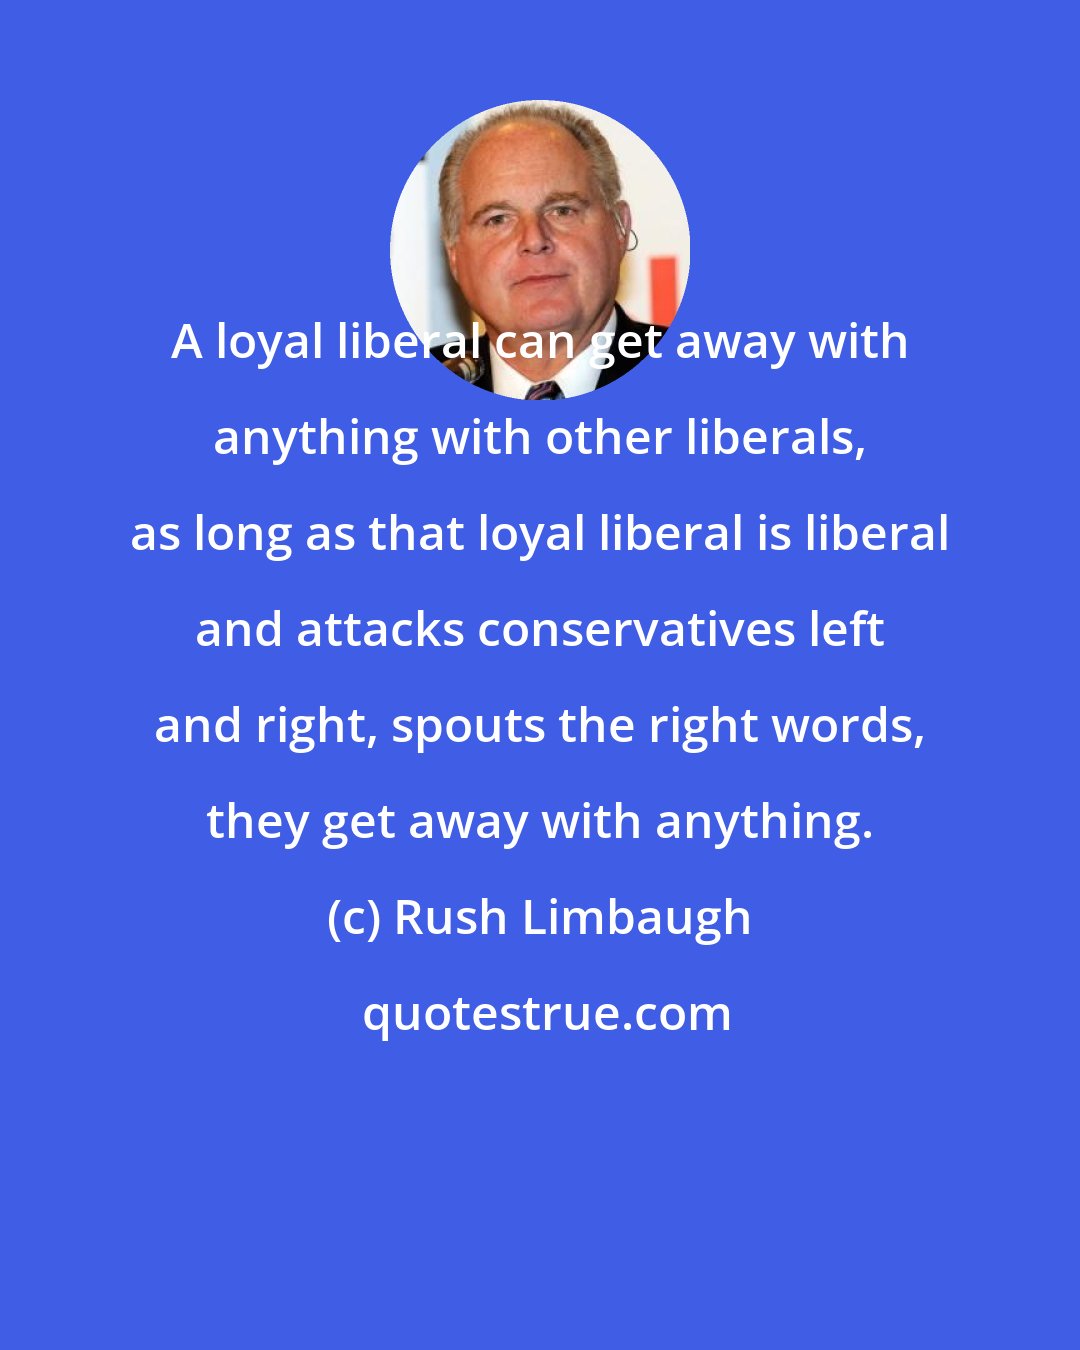 Rush Limbaugh: A loyal liberal can get away with anything with other liberals, as long as that loyal liberal is liberal and attacks conservatives left and right, spouts the right words, they get away with anything.